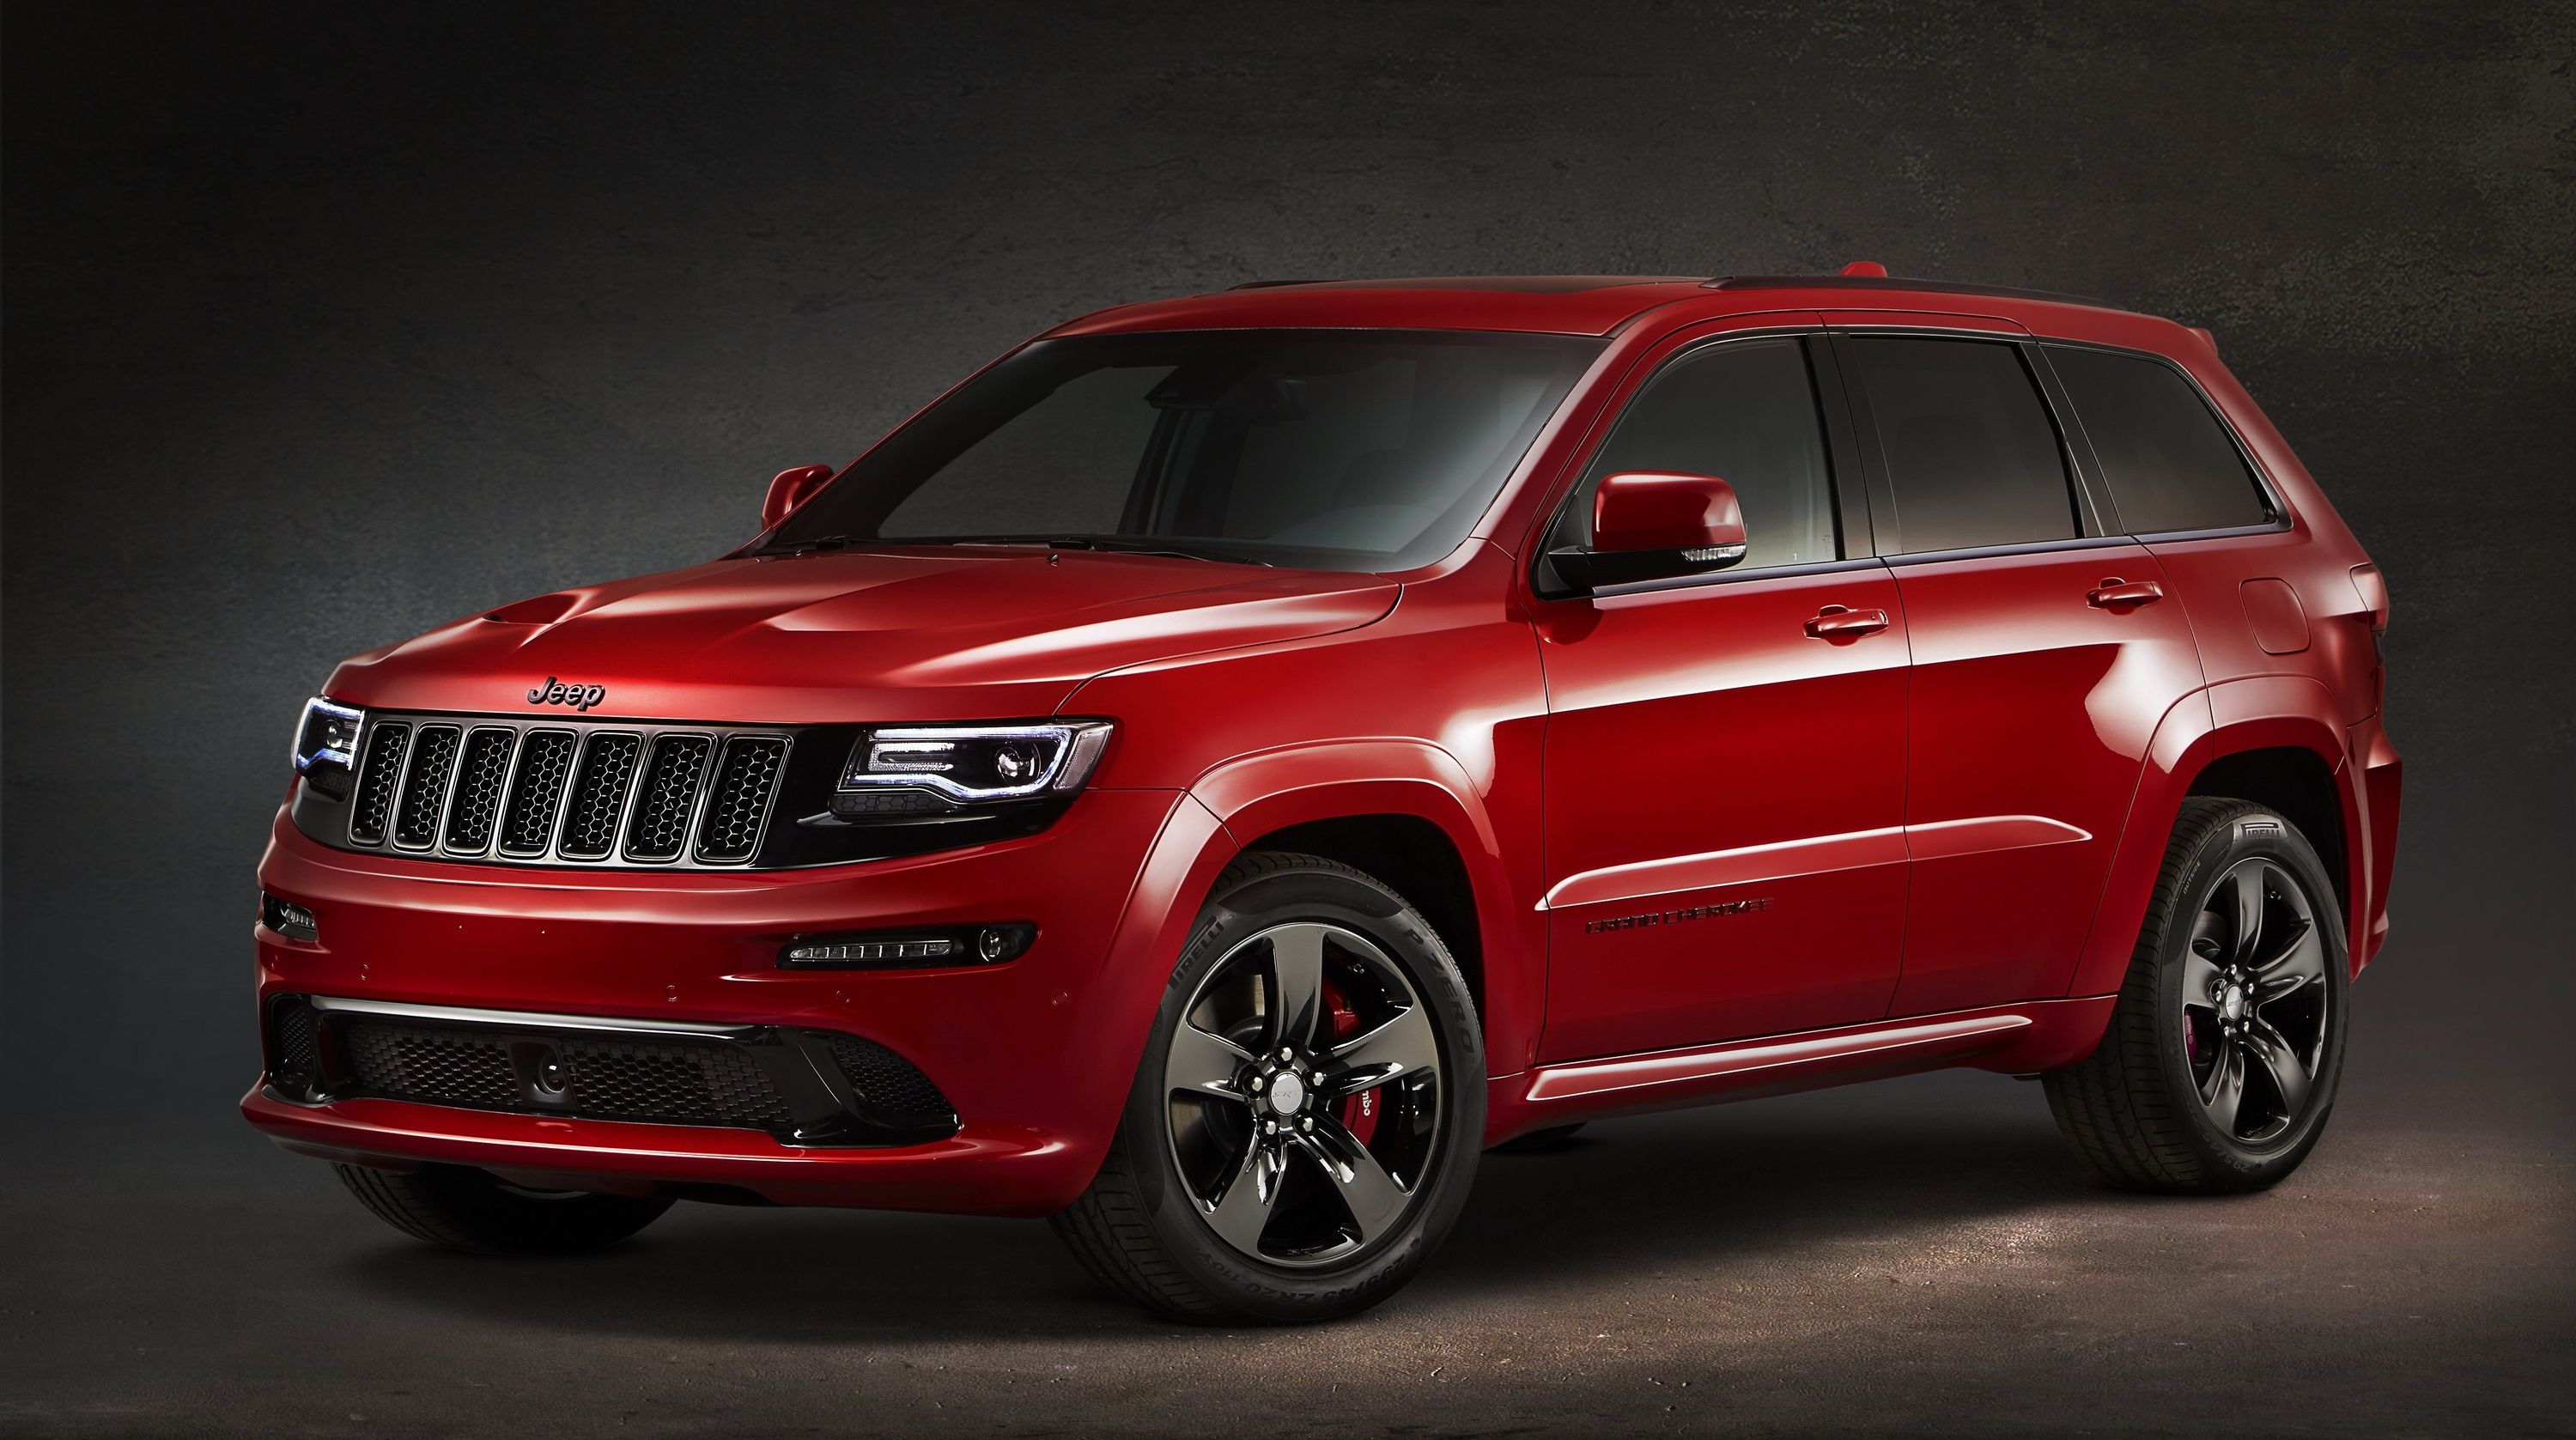 Jeep Grand Cherokee SRT Red Vapor Limited Edition Picture, Photo, Wallpaper